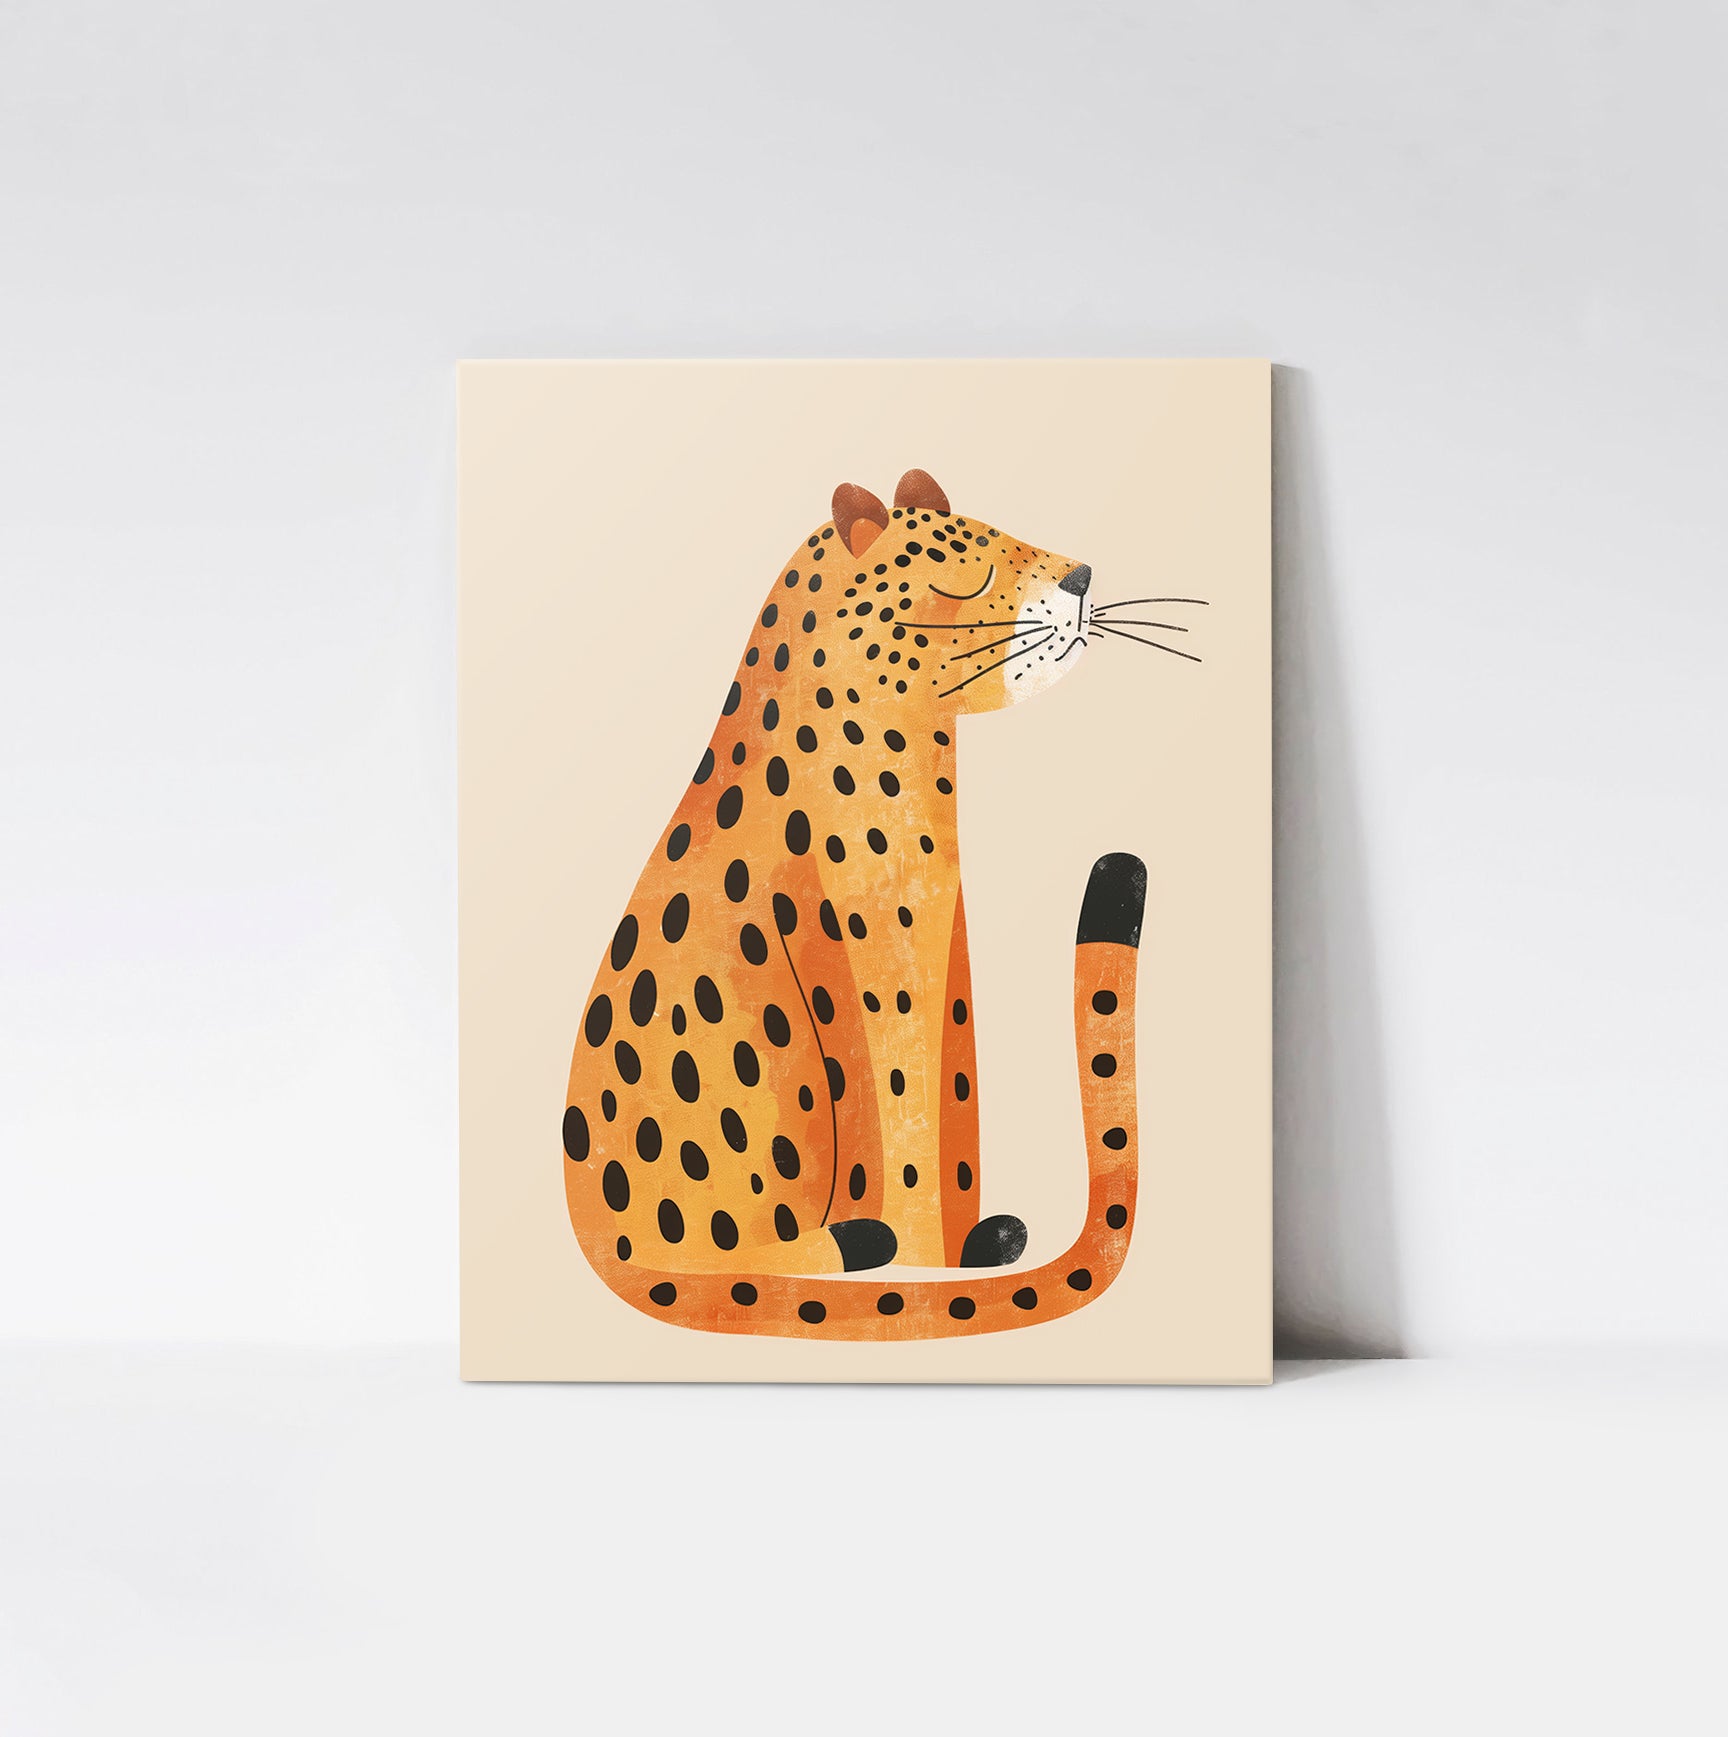 Art print of a tranquil leopard sitting peacefully against a soft beige background, displayed on a wood board.